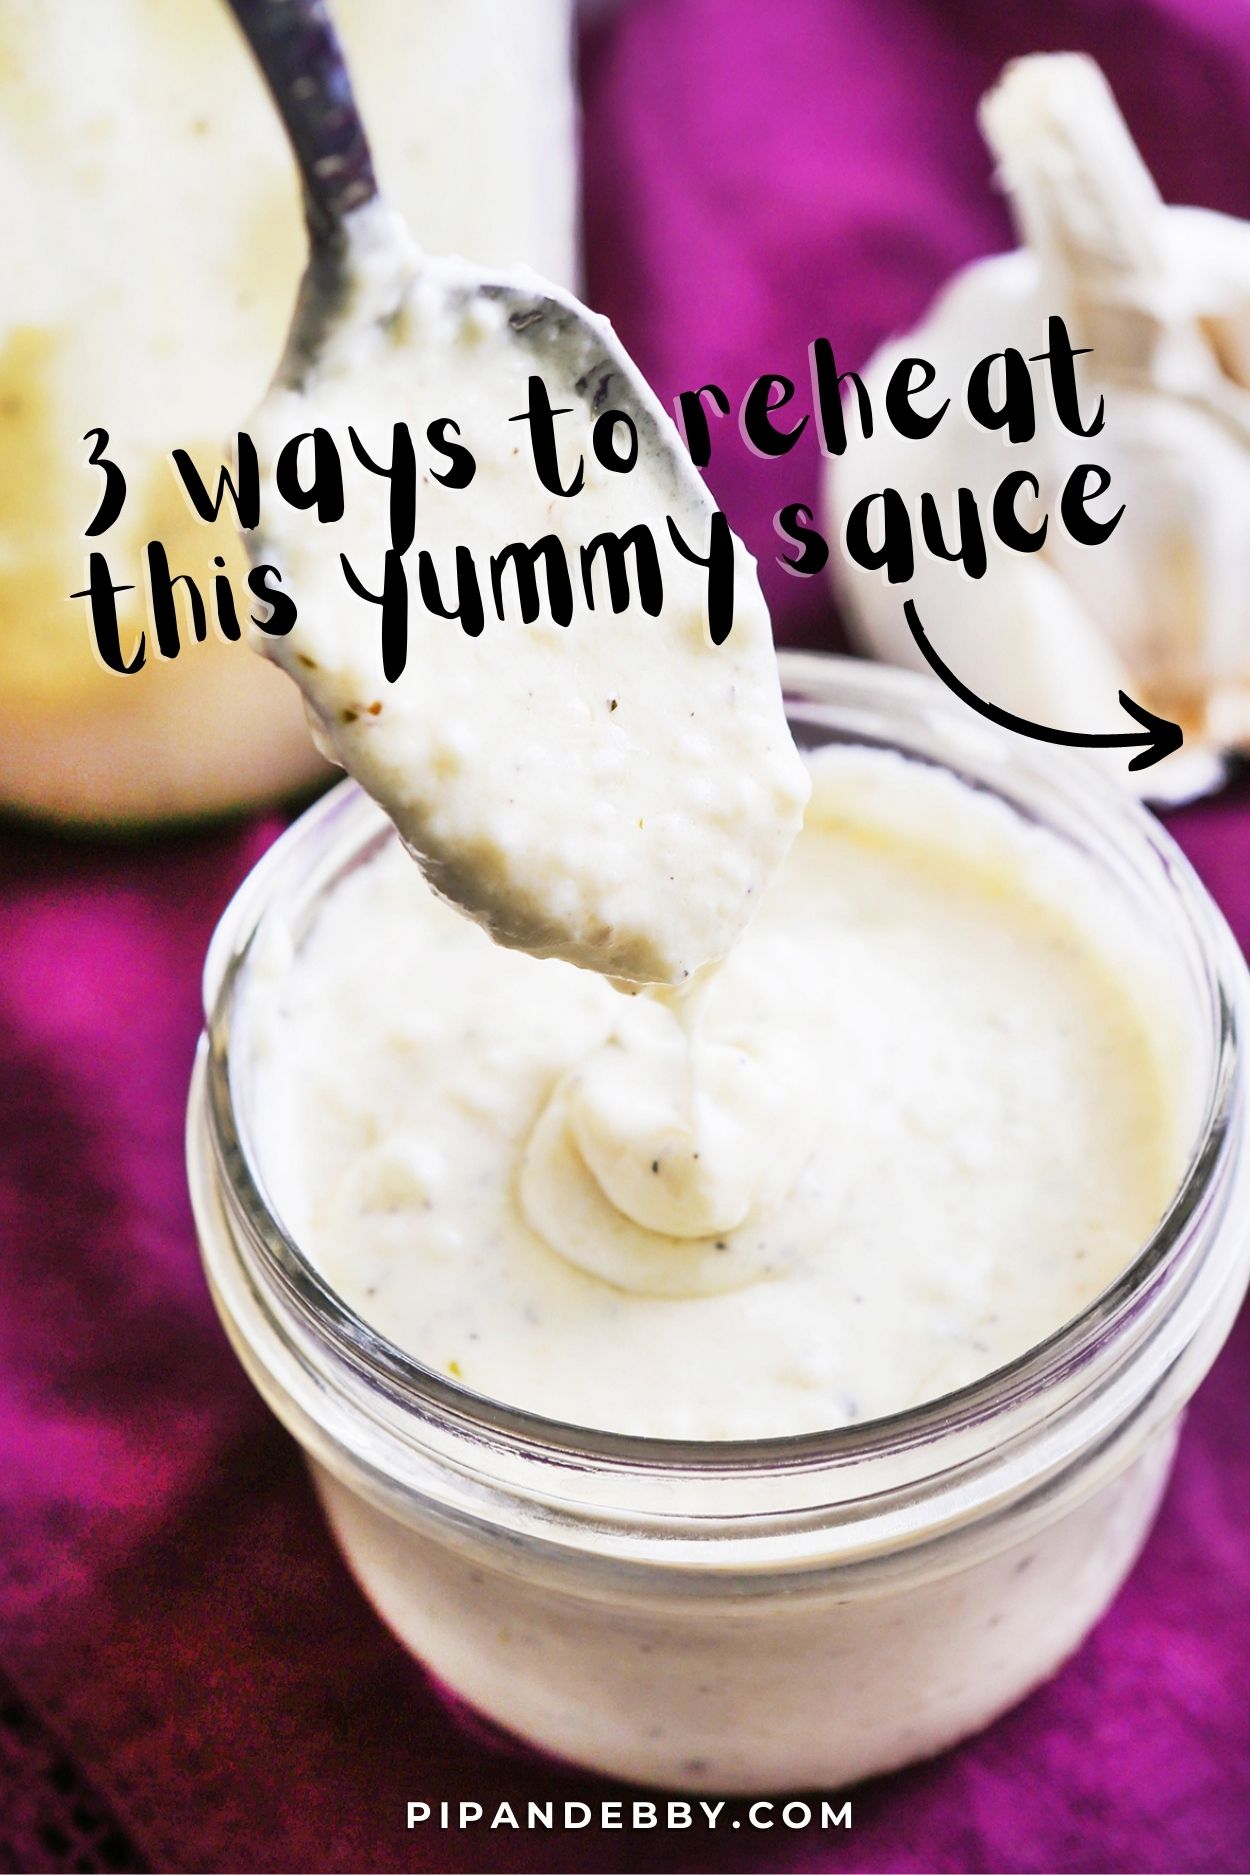 Photo of alfredo sauce in a jar with text overlay reading, "3 ways to reheat this yummy sauce."